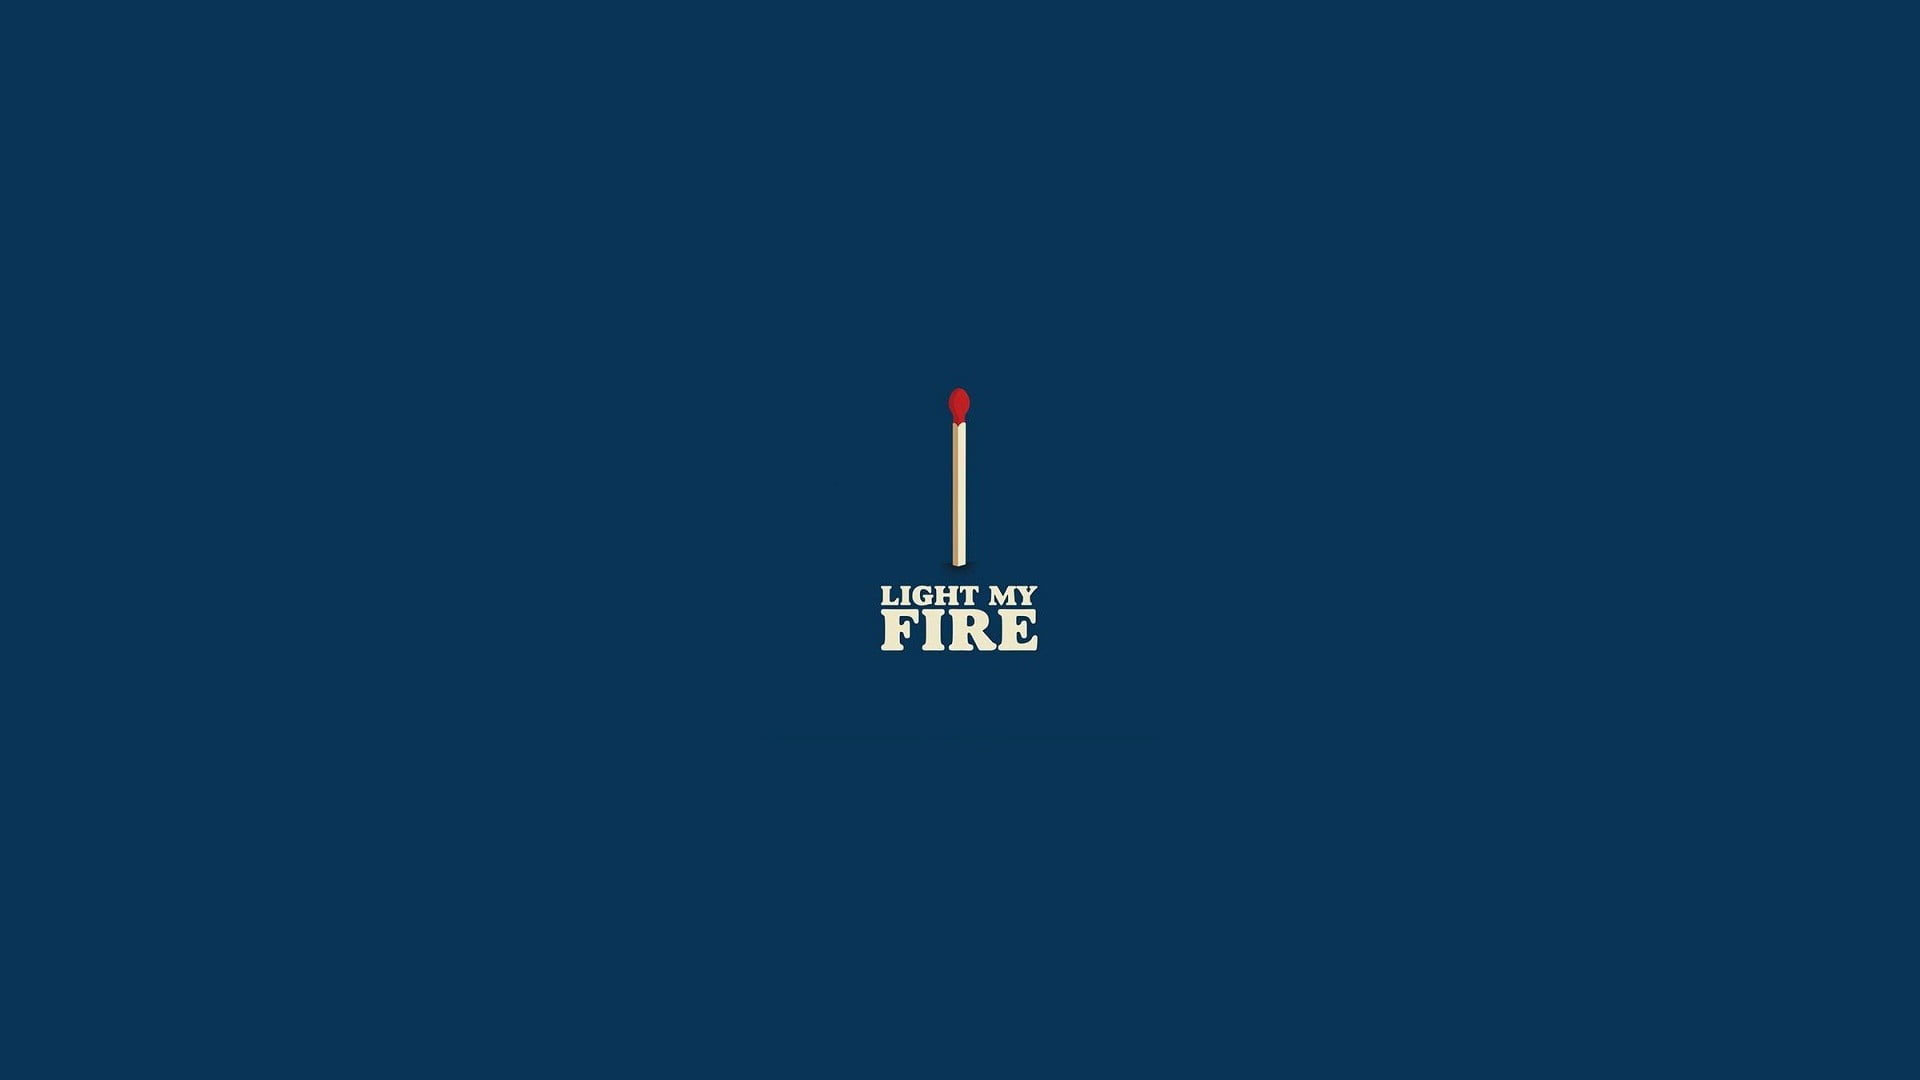 Blue background with text overlay, Light my Fire, minimalism